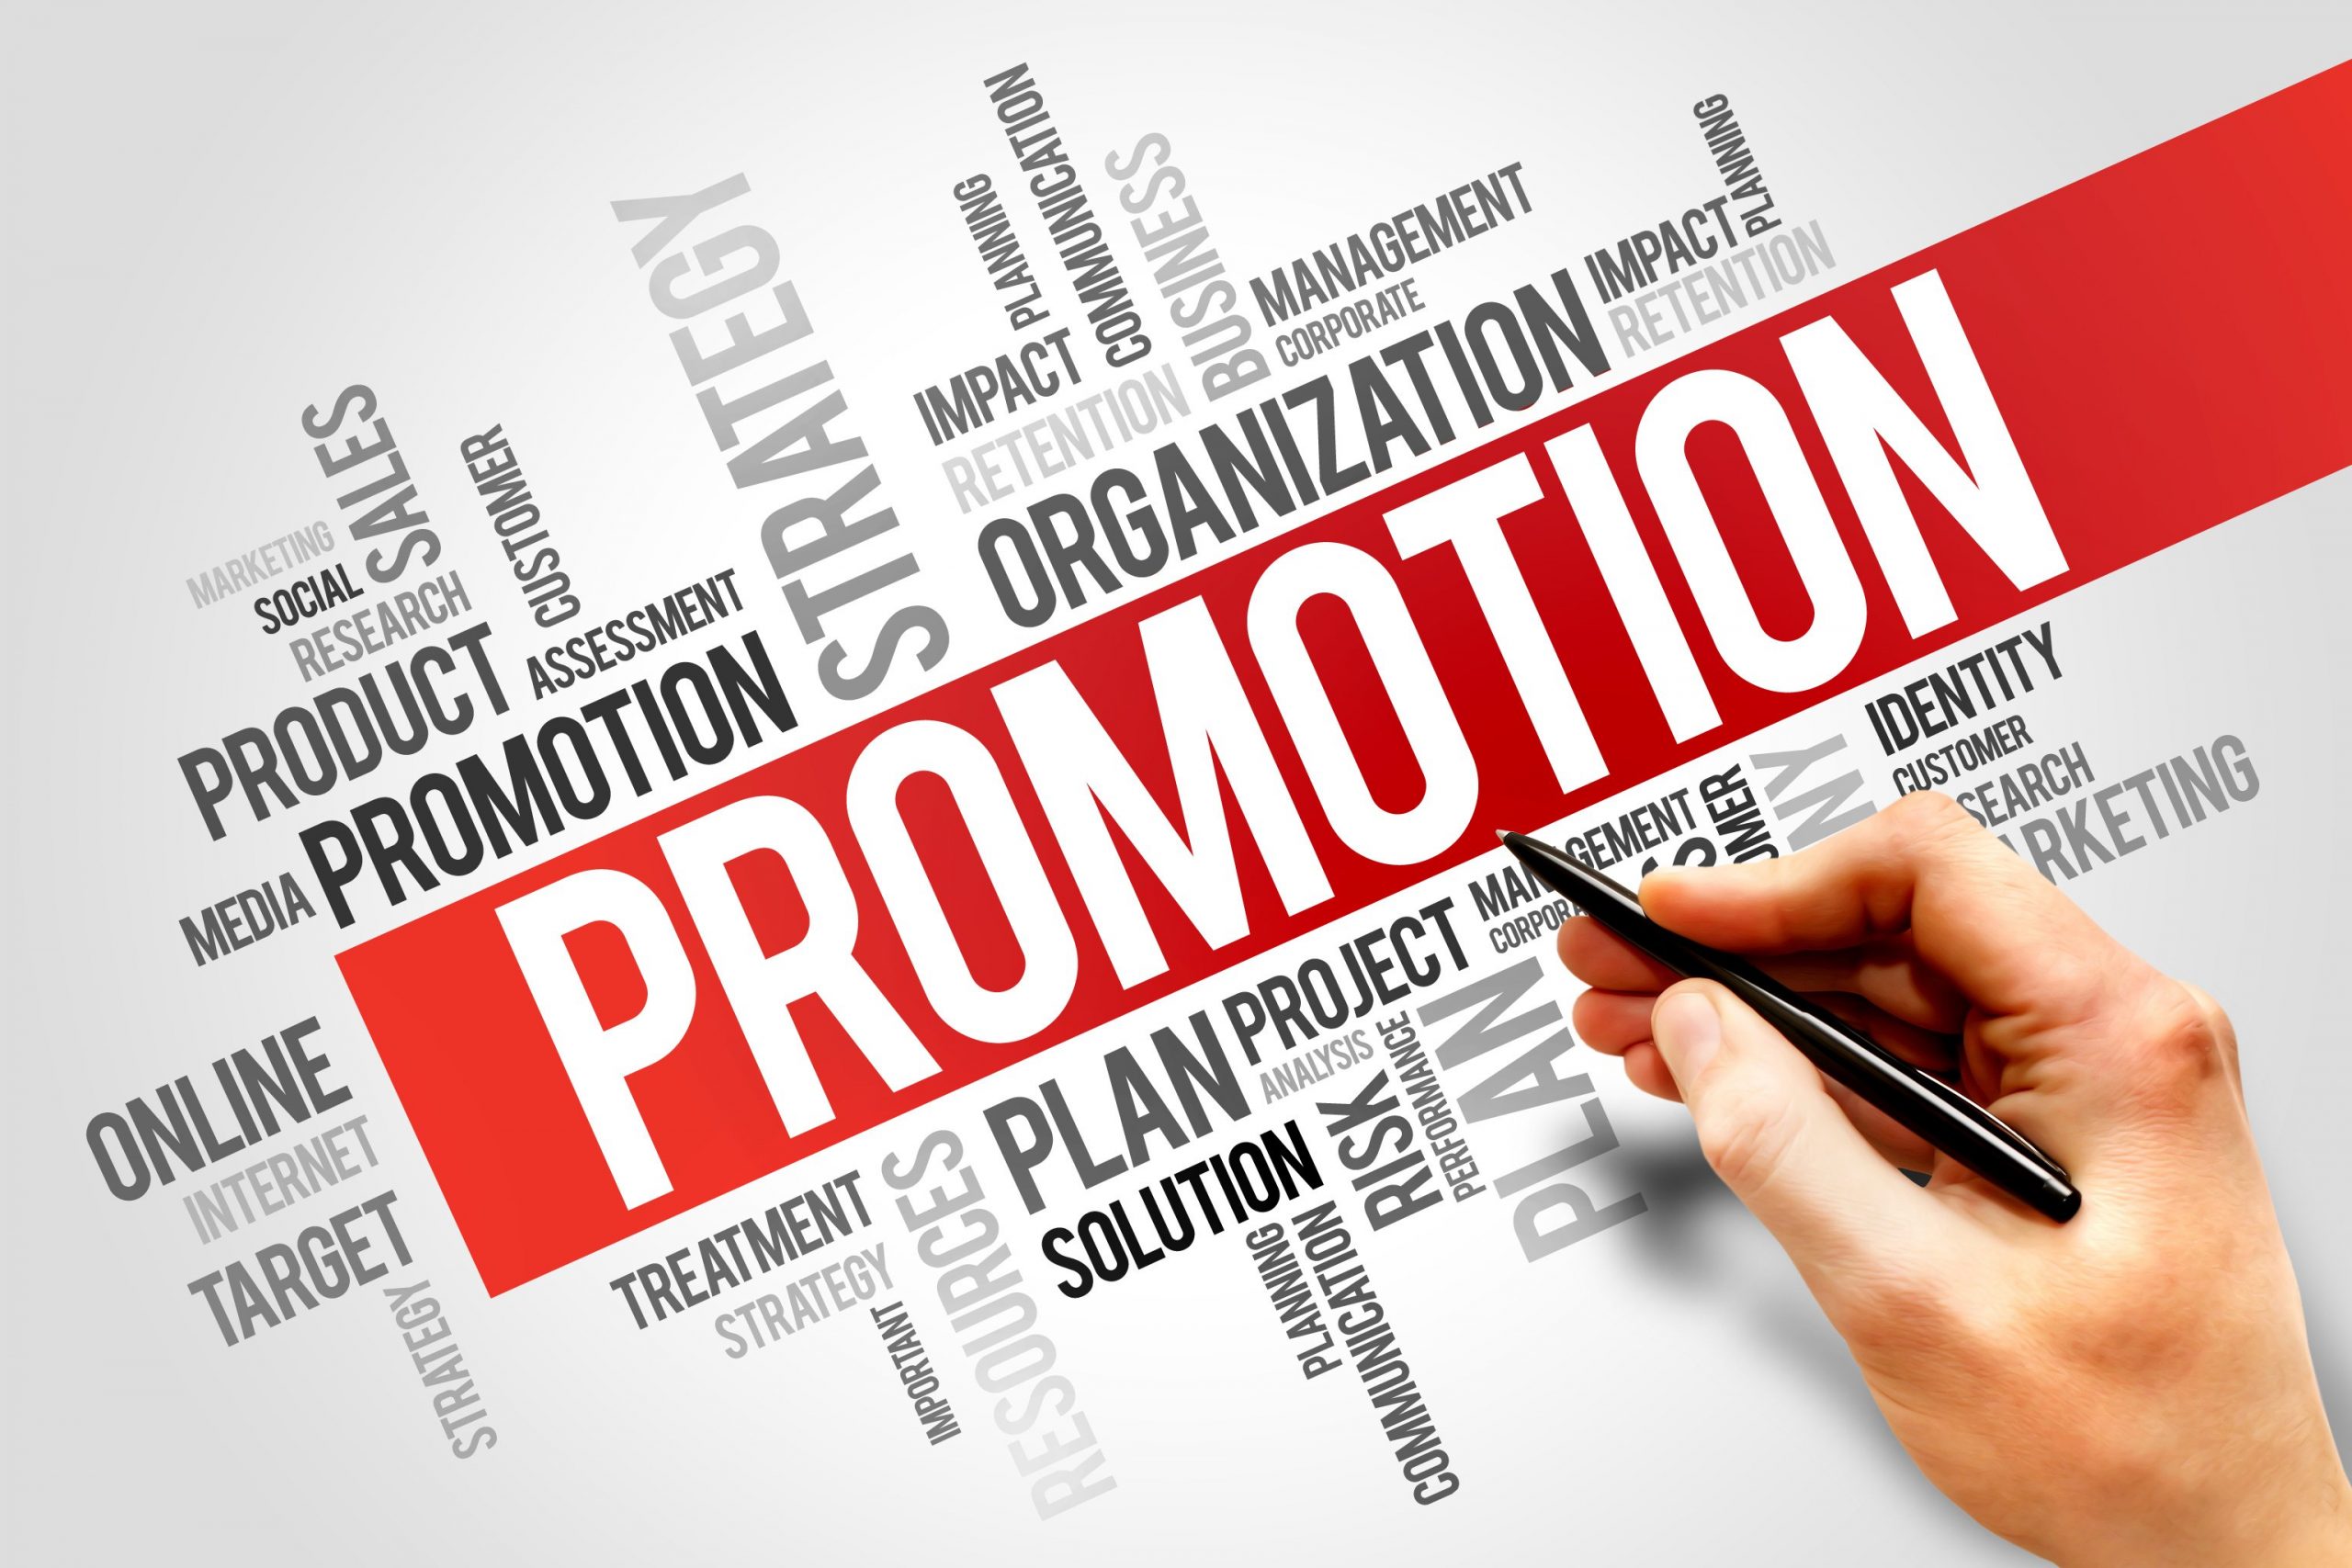 Business promotion through gifts